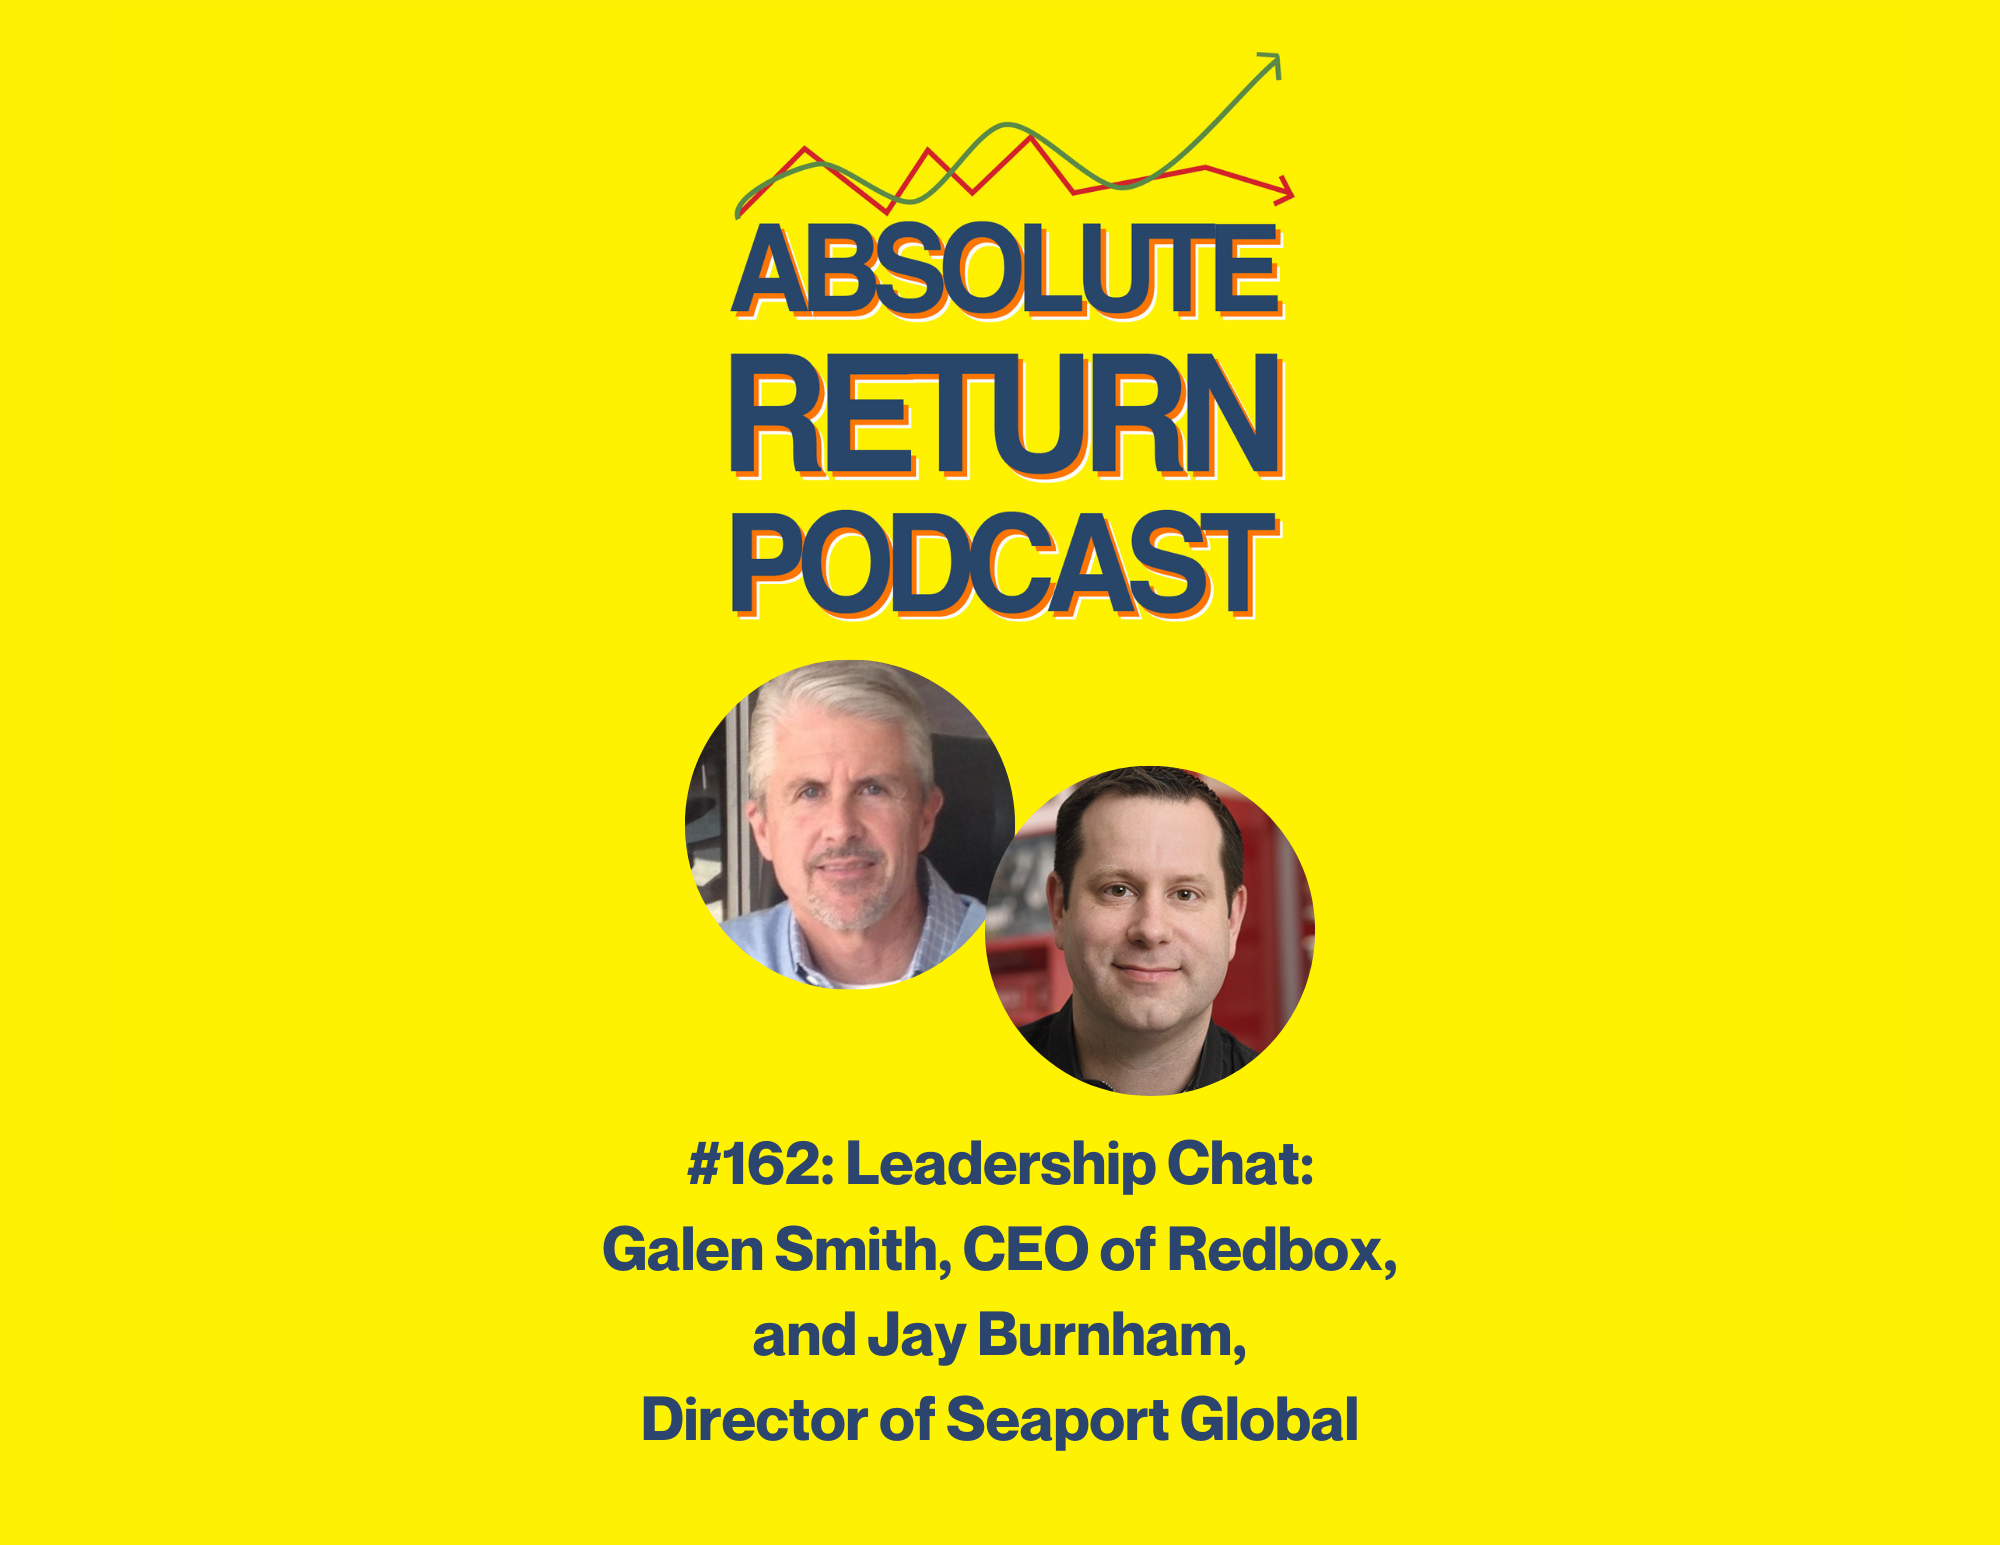 Podcasts Absolute Return Podcast #162: Leadership Chat: Galen Smith, CEO Of Redbox, And Jay Burnham, Director Of Seaport Global